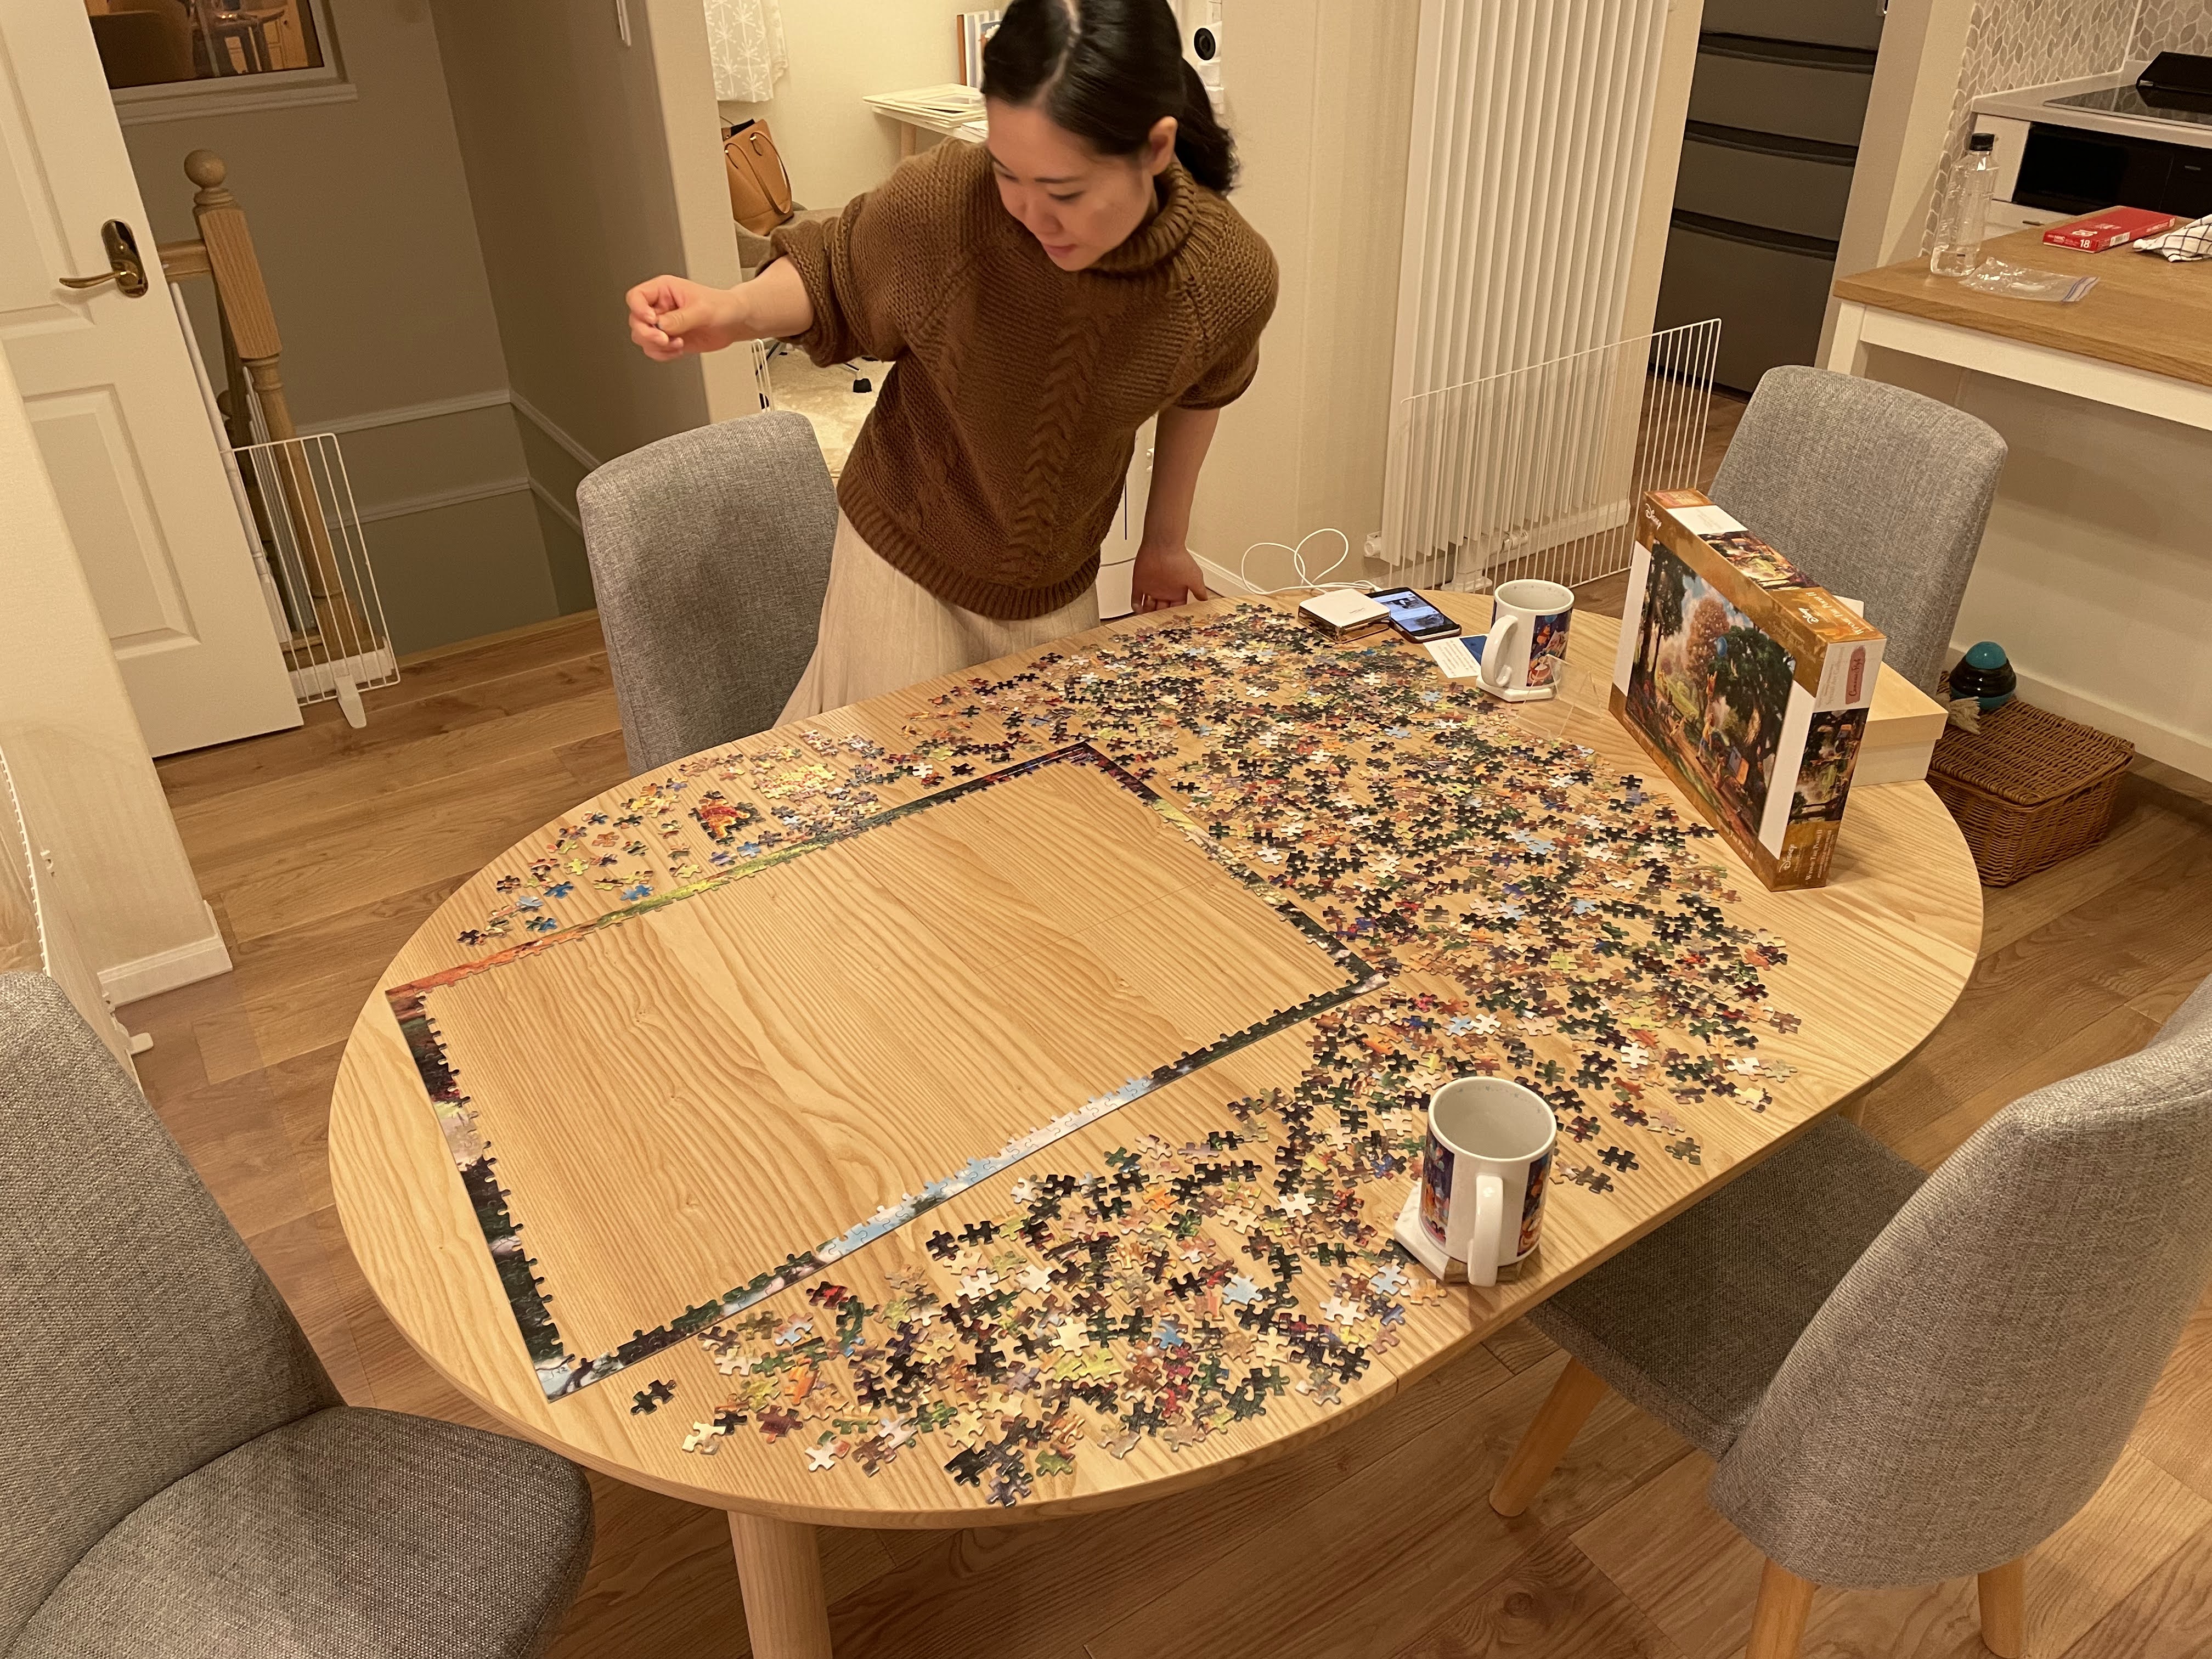 puzzle pieces laid out on the table